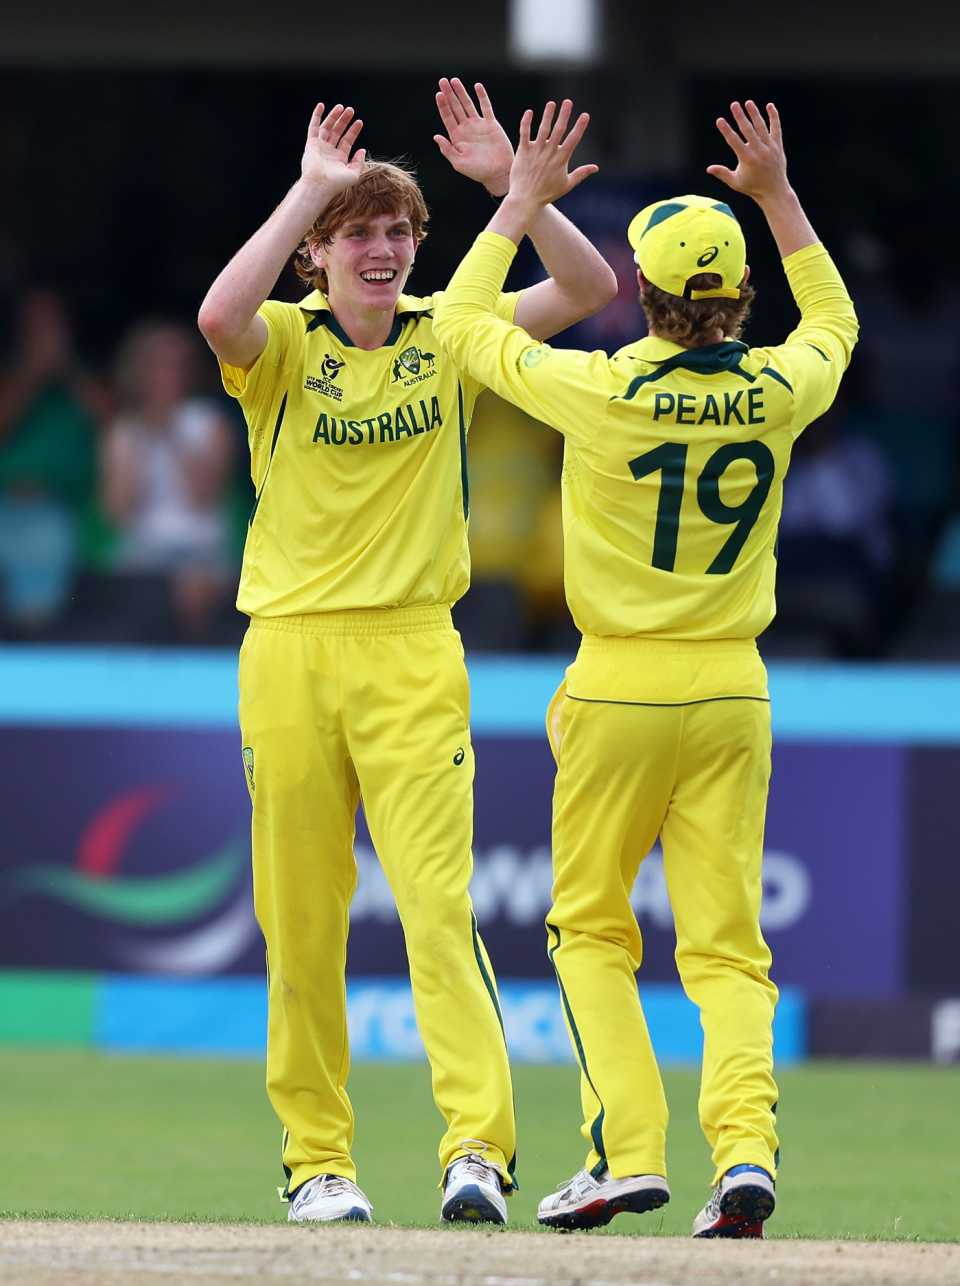 Callum Vidler and Oliver Peake celebrate the wicket of Noah Thain